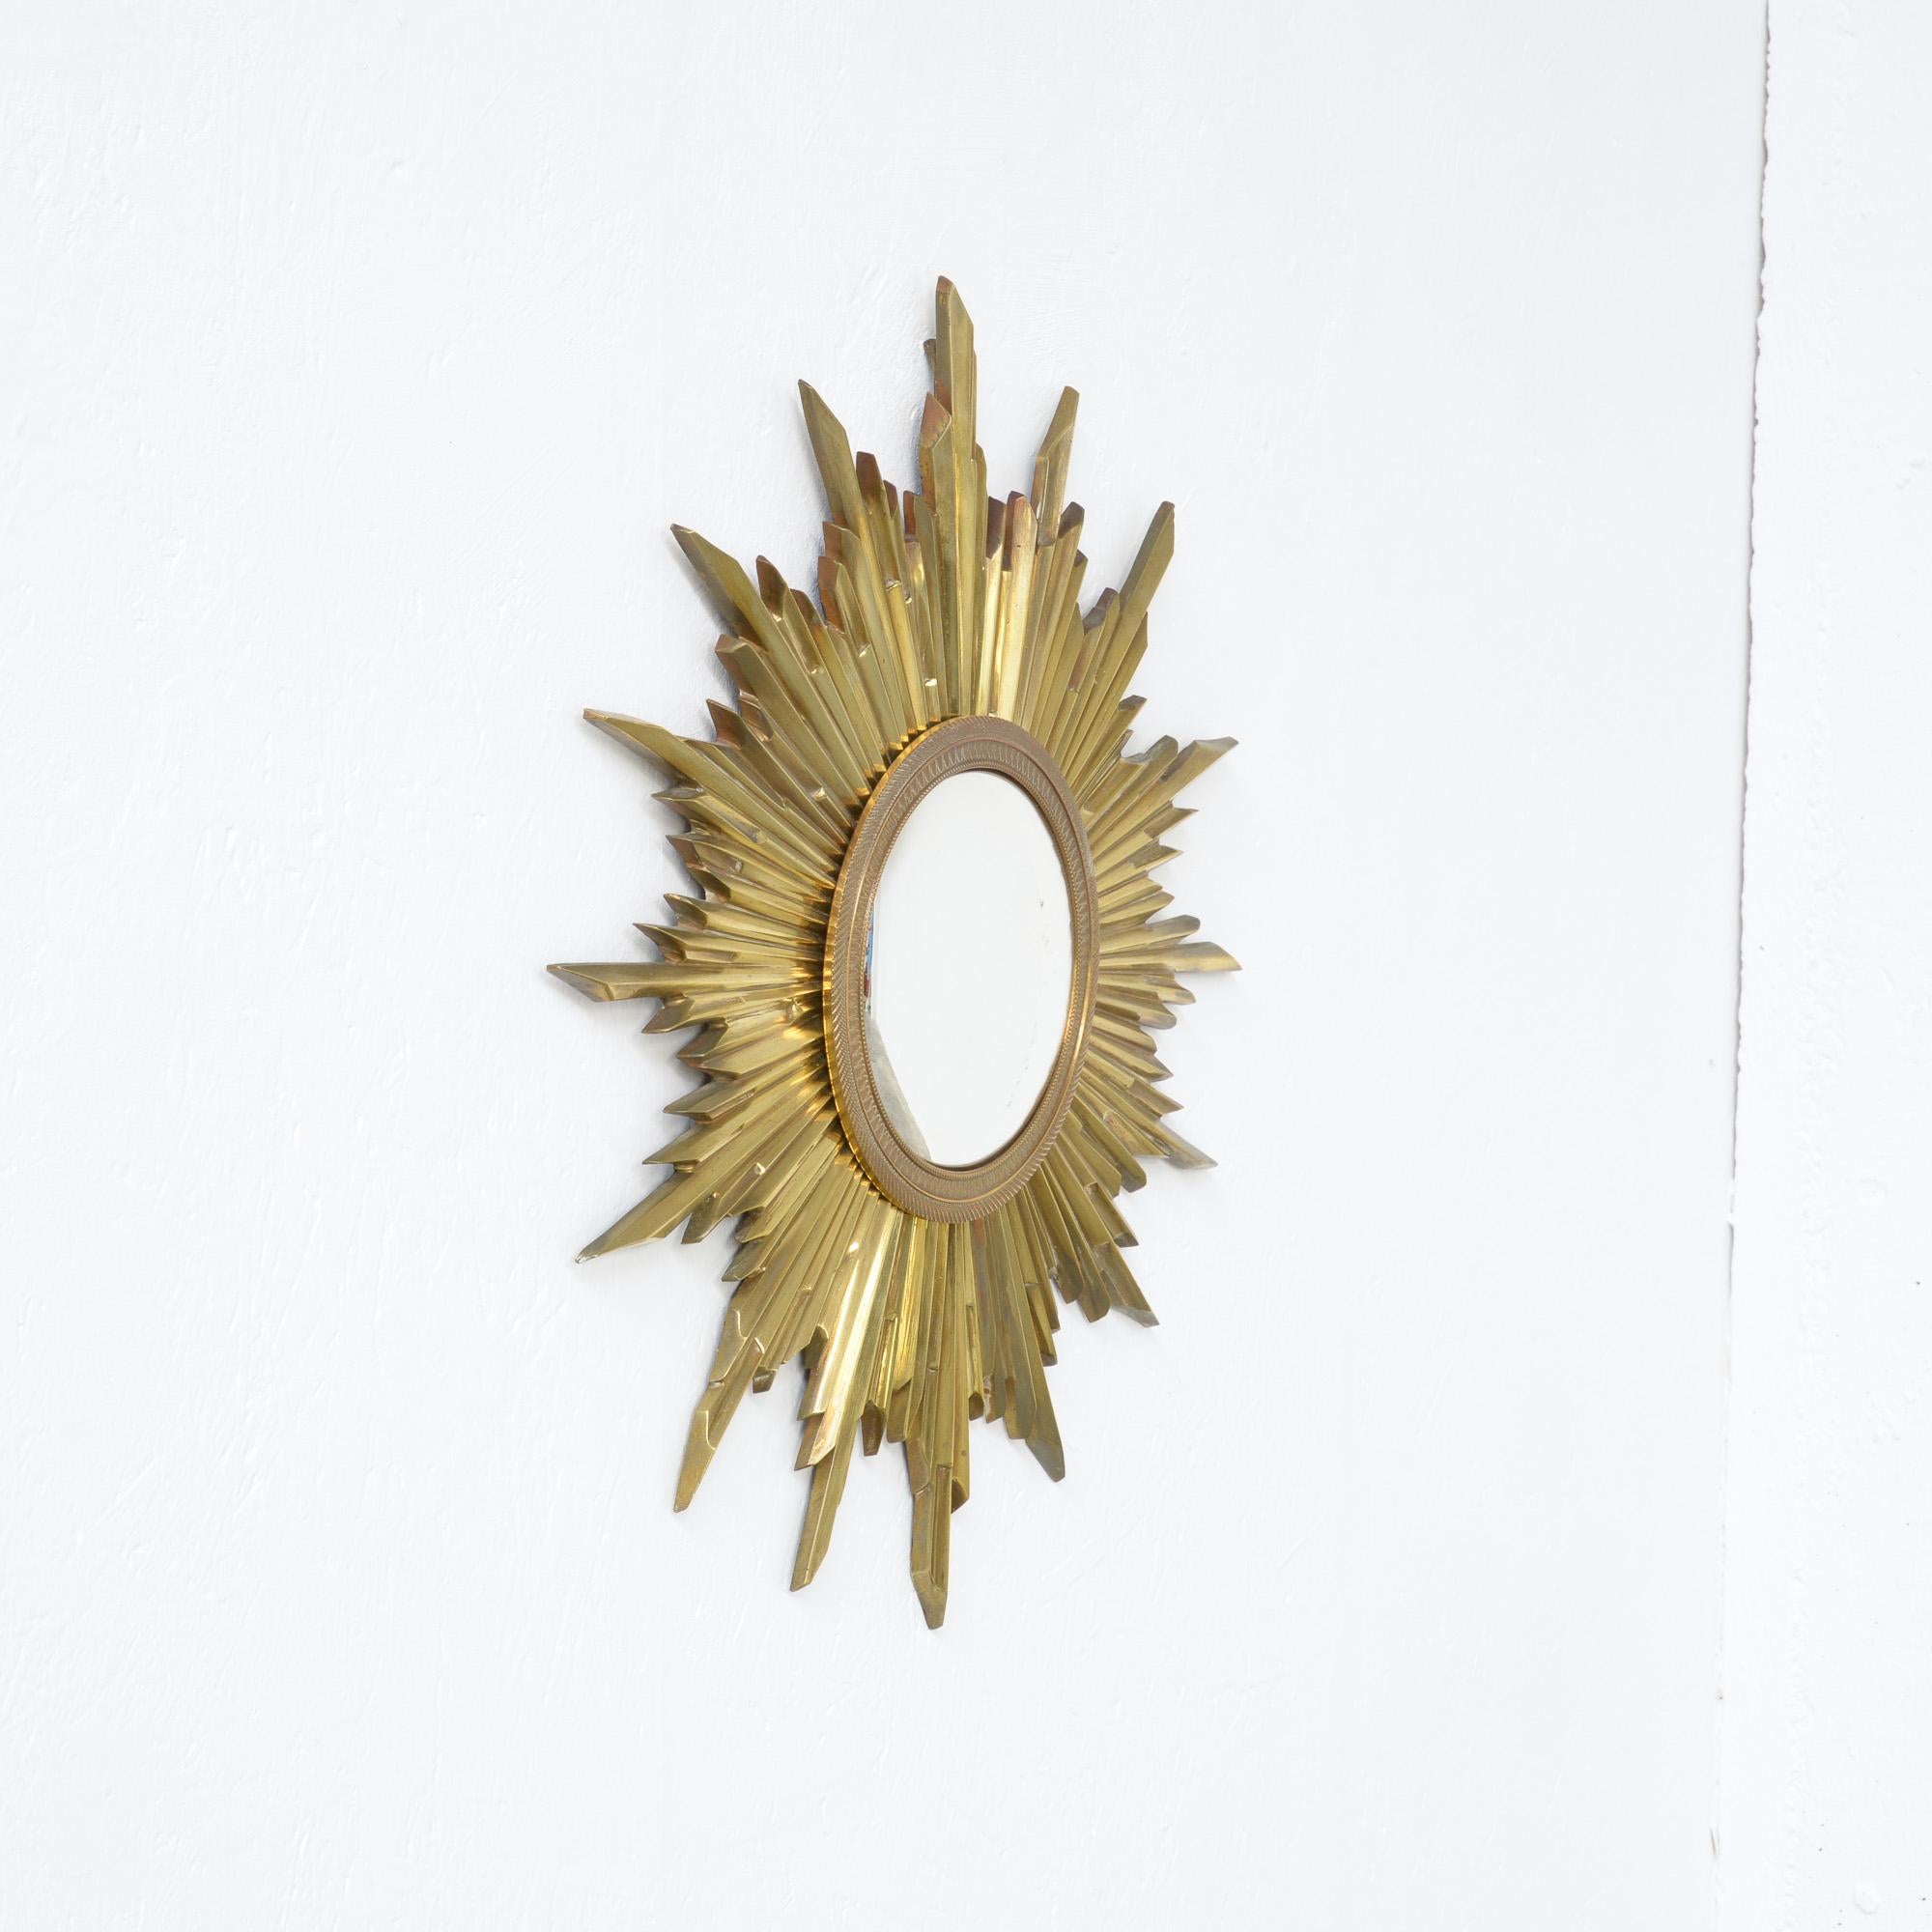 This bronze sunburst mirror can be dated circa 1900.
The bright full bronze mirror frame is very nice detailed, it holds the original convex mirror glass.
This high quality mirror is in perfect vintage condition. It is a very rare piece.
   